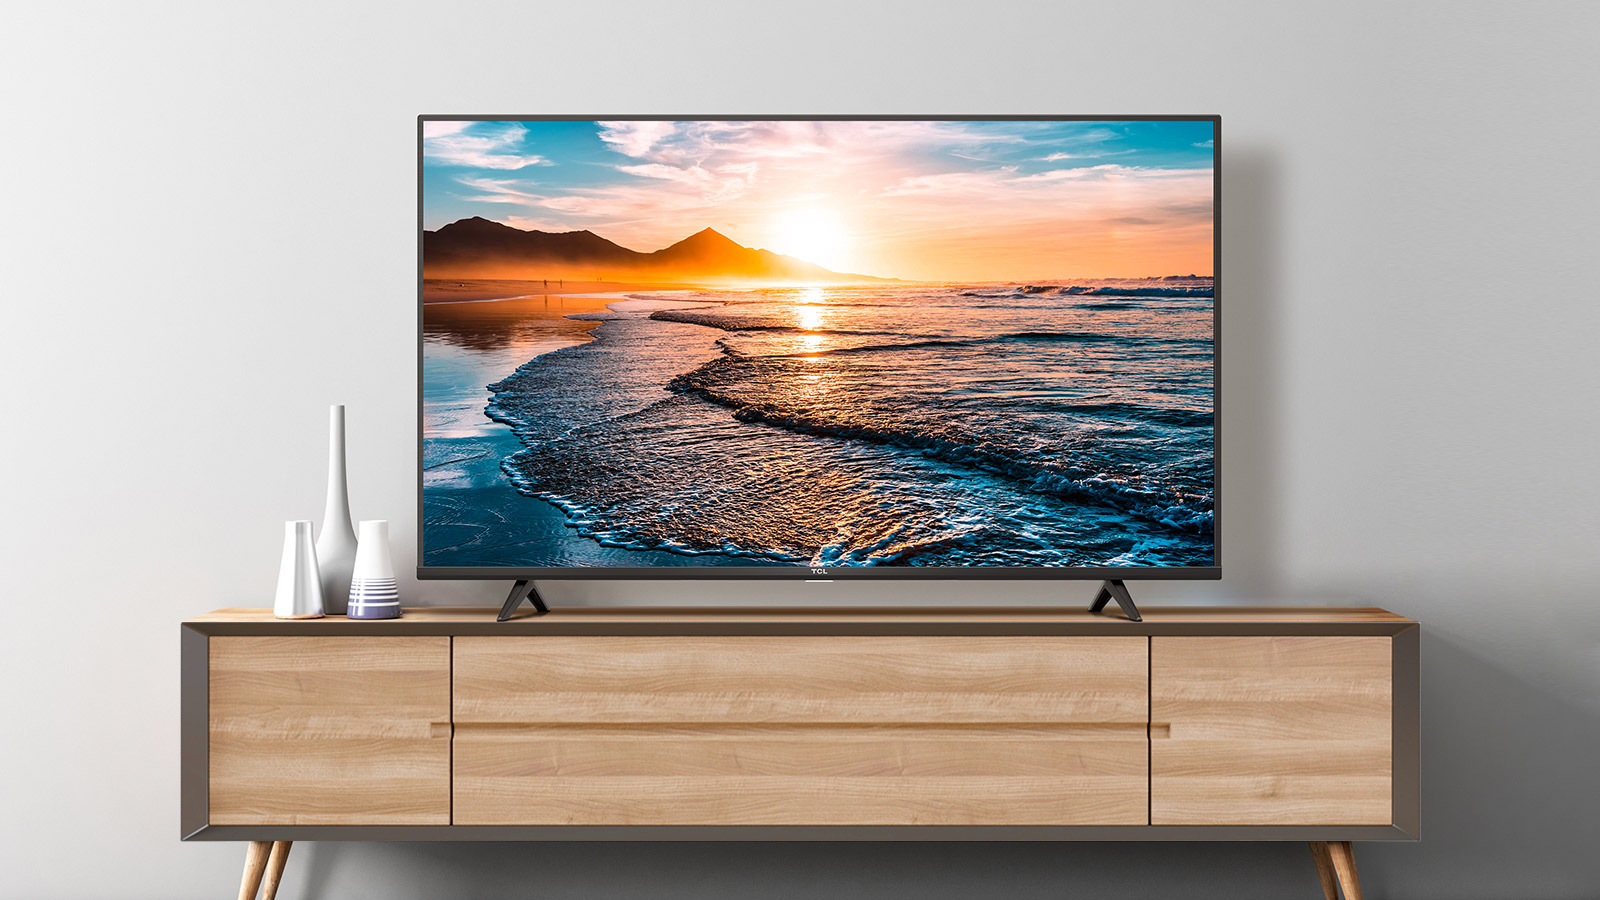 TCL TV P615 Series-4K HDR Android TV Unlimited Content-TCL Global